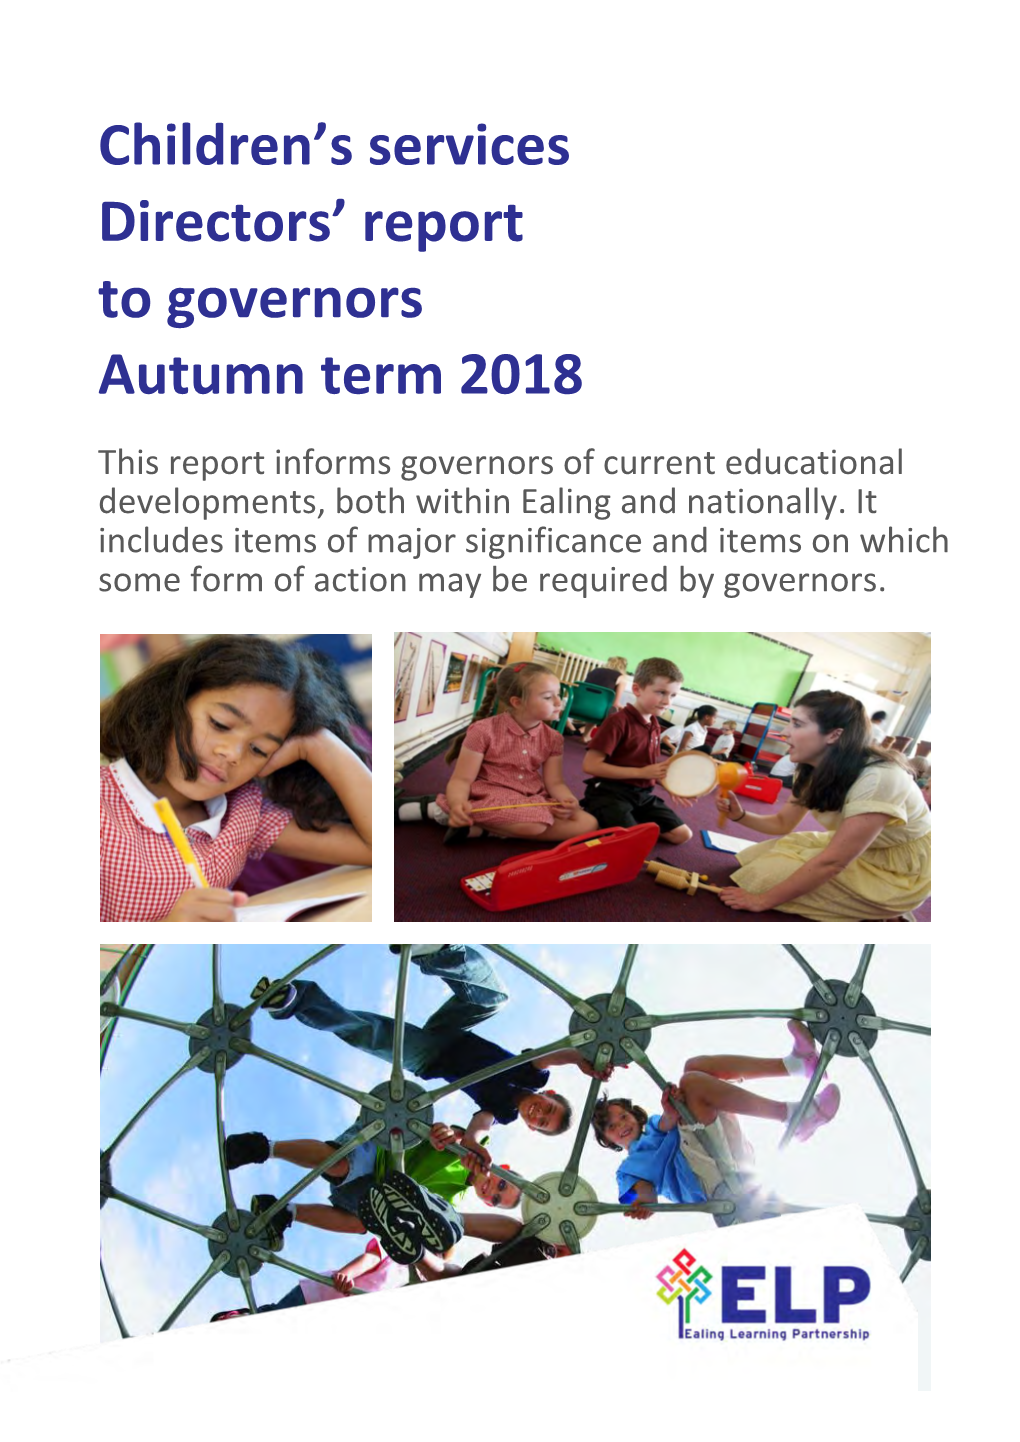 Children's Services Directors' Report to Governors Autumn Term 2018